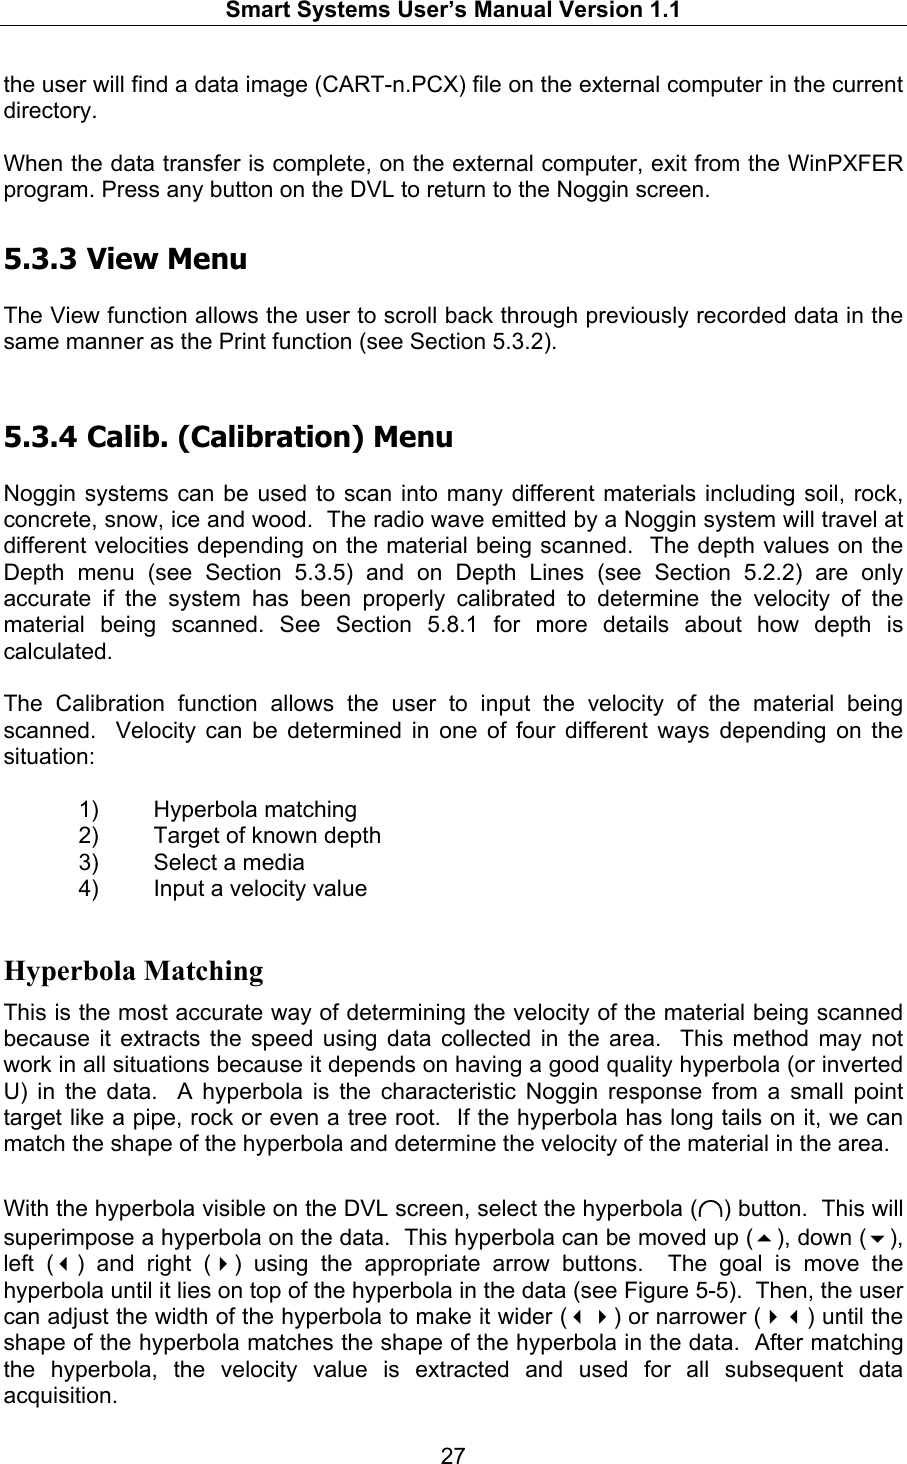   Smart Systems User’s Manual Version 1.1  27  the user will find a data image (CART-n.PCX) file on the external computer in the current directory.  When the data transfer is complete, on the external computer, exit from the WinPXFER program. Press any button on the DVL to return to the Noggin screen. 5.3.3  View Menu  The View function allows the user to scroll back through previously recorded data in the same manner as the Print function (see Section 5.3.2).   5.3.4  Calib. (Calibration) Menu  Noggin systems can be used to scan into many different materials including soil, rock, concrete, snow, ice and wood.  The radio wave emitted by a Noggin system will travel at different velocities depending on the material being scanned.  The depth values on the Depth menu (see Section 5.3.5) and on Depth Lines (see Section 5.2.2) are only accurate if the system has been properly calibrated to determine the velocity of the material being scanned. See Section 5.8.1 for more details about how depth is calculated.  The Calibration function allows the user to input the velocity of the material being scanned.  Velocity can be determined in one of four different ways depending on the situation:  1) Hyperbola matching 2)  Target of known depth 3)  Select a media 4)  Input a velocity value  Hyperbola Matching This is the most accurate way of determining the velocity of the material being scanned because it extracts the speed using data collected in the area.  This method may not work in all situations because it depends on having a good quality hyperbola (or inverted U) in the data.  A hyperbola is the characteristic Noggin response from a small point target like a pipe, rock or even a tree root.  If the hyperbola has long tails on it, we can match the shape of the hyperbola and determine the velocity of the material in the area.  With the hyperbola visible on the DVL screen, select the hyperbola (∩) button.  This will superimpose a hyperbola on the data.  This hyperbola can be moved up (), down (), left () and right () using the appropriate arrow buttons.  The goal is move the hyperbola until it lies on top of the hyperbola in the data (see Figure 5-5).  Then, the user can adjust the width of the hyperbola to make it wider () or narrower () until the shape of the hyperbola matches the shape of the hyperbola in the data.  After matching the hyperbola, the velocity value is extracted and used for all subsequent data acquisition. 